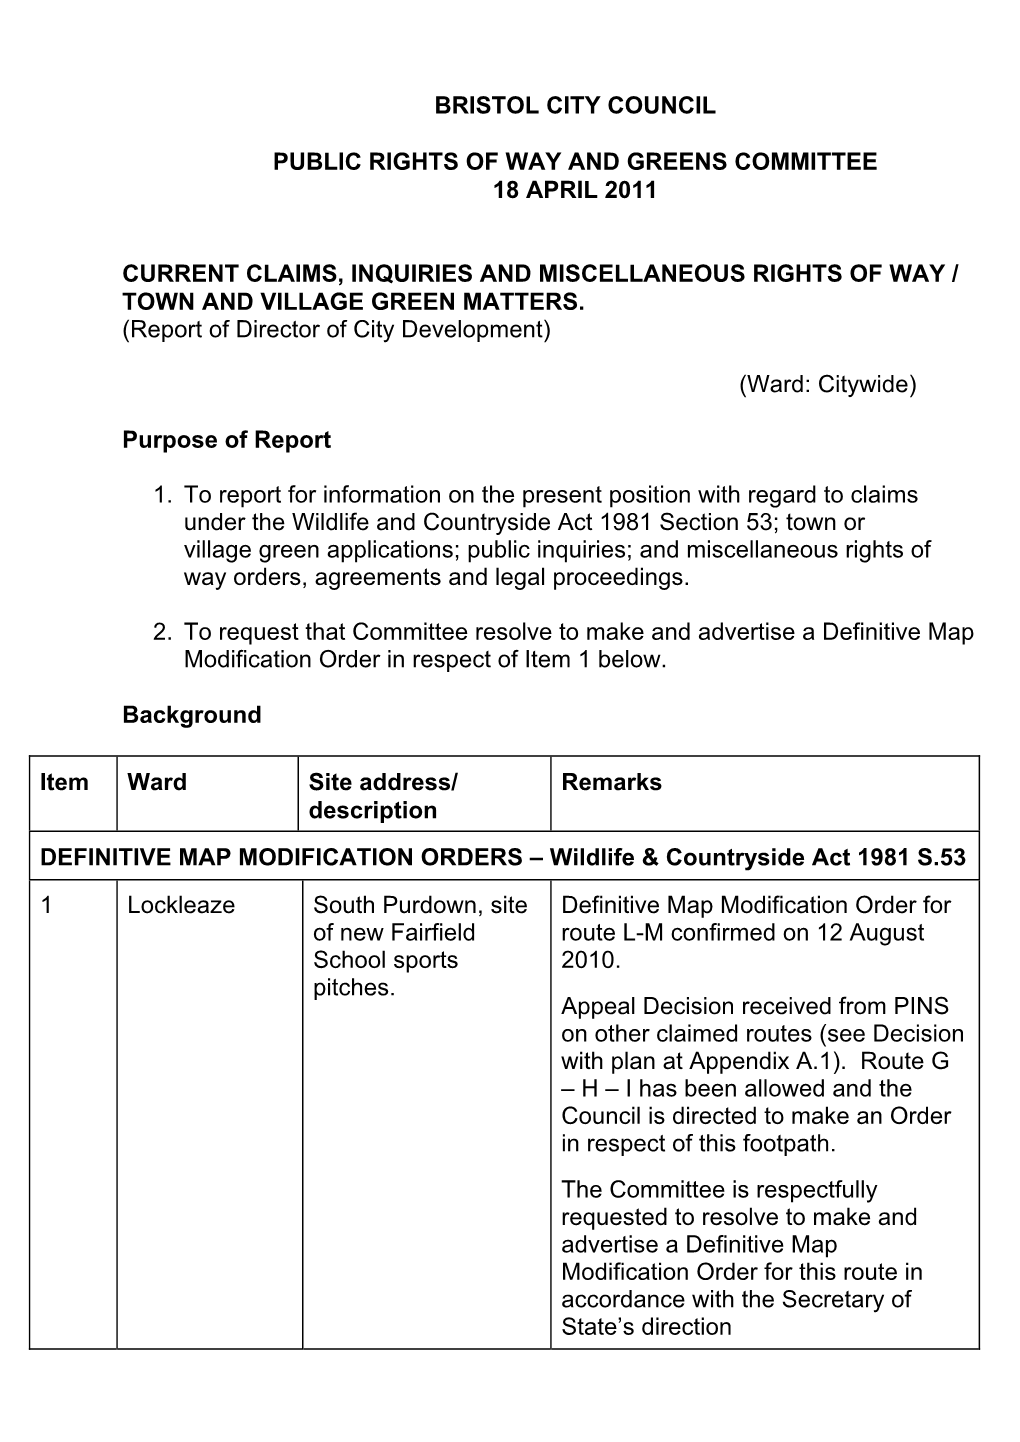 Current Claims, Inquiries and Miscellaneous Rights of Way / Town and Village Green Matters